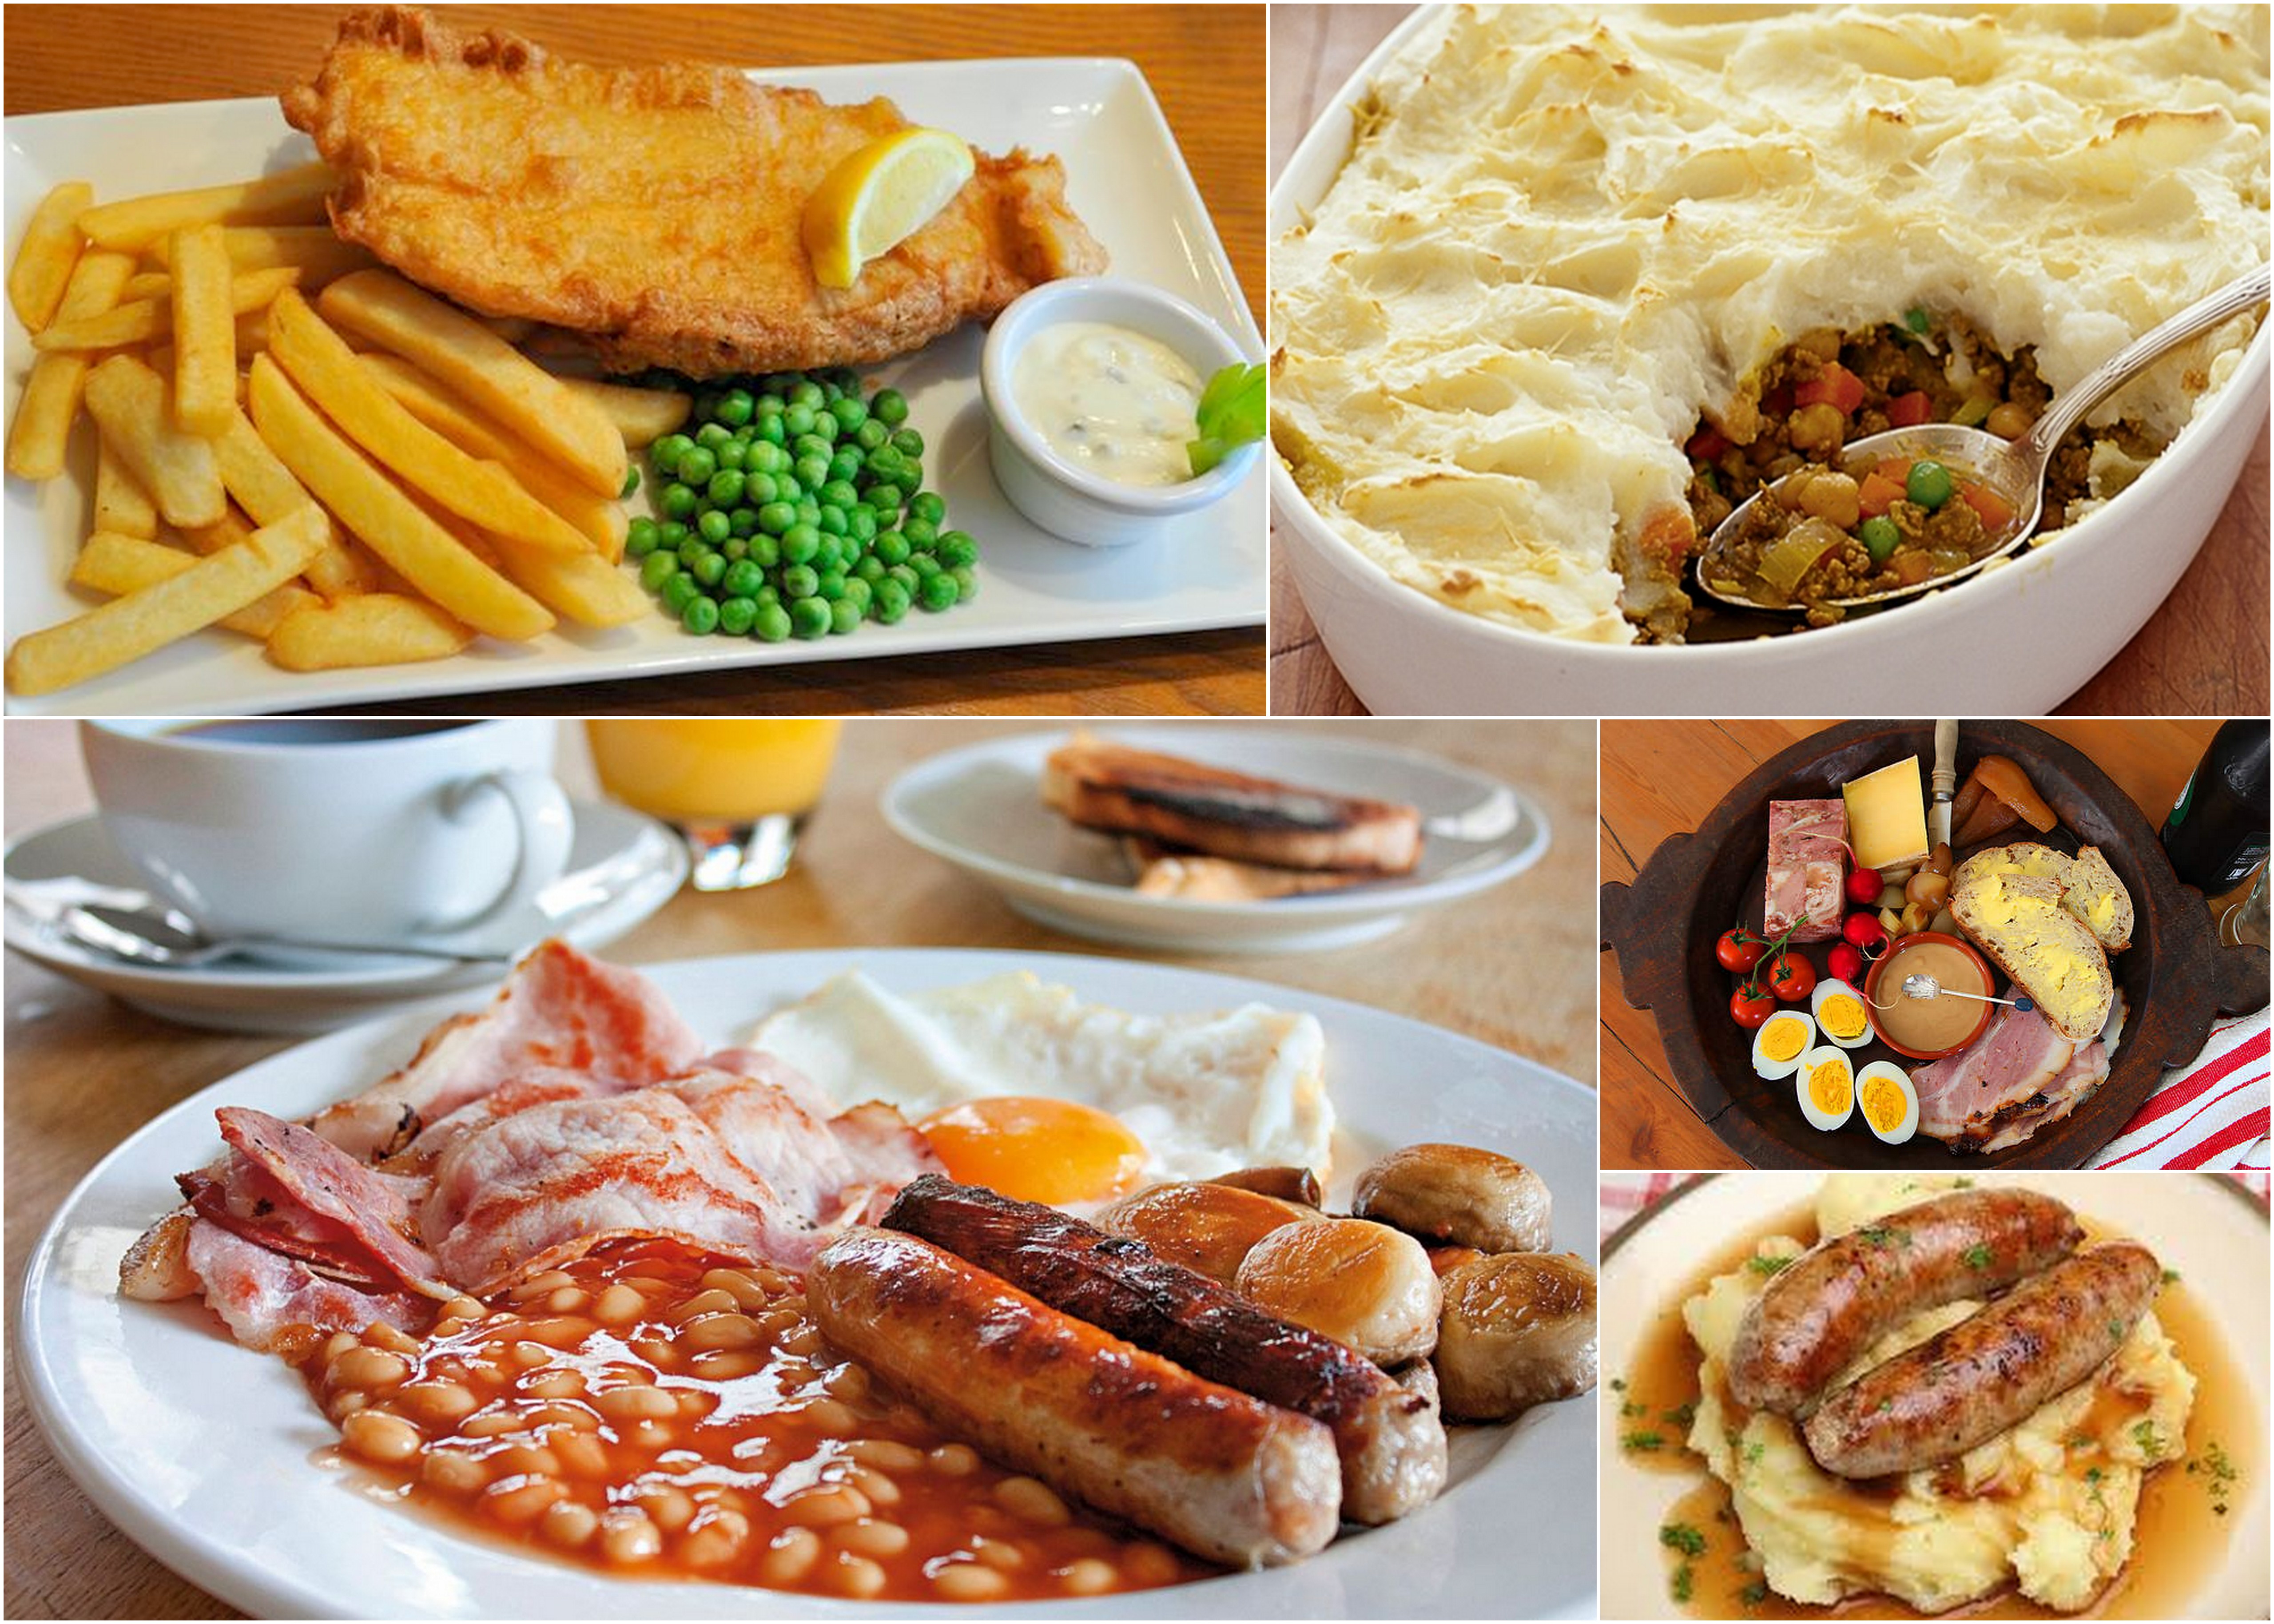 5 British Dishes You Have to Try at Least Once